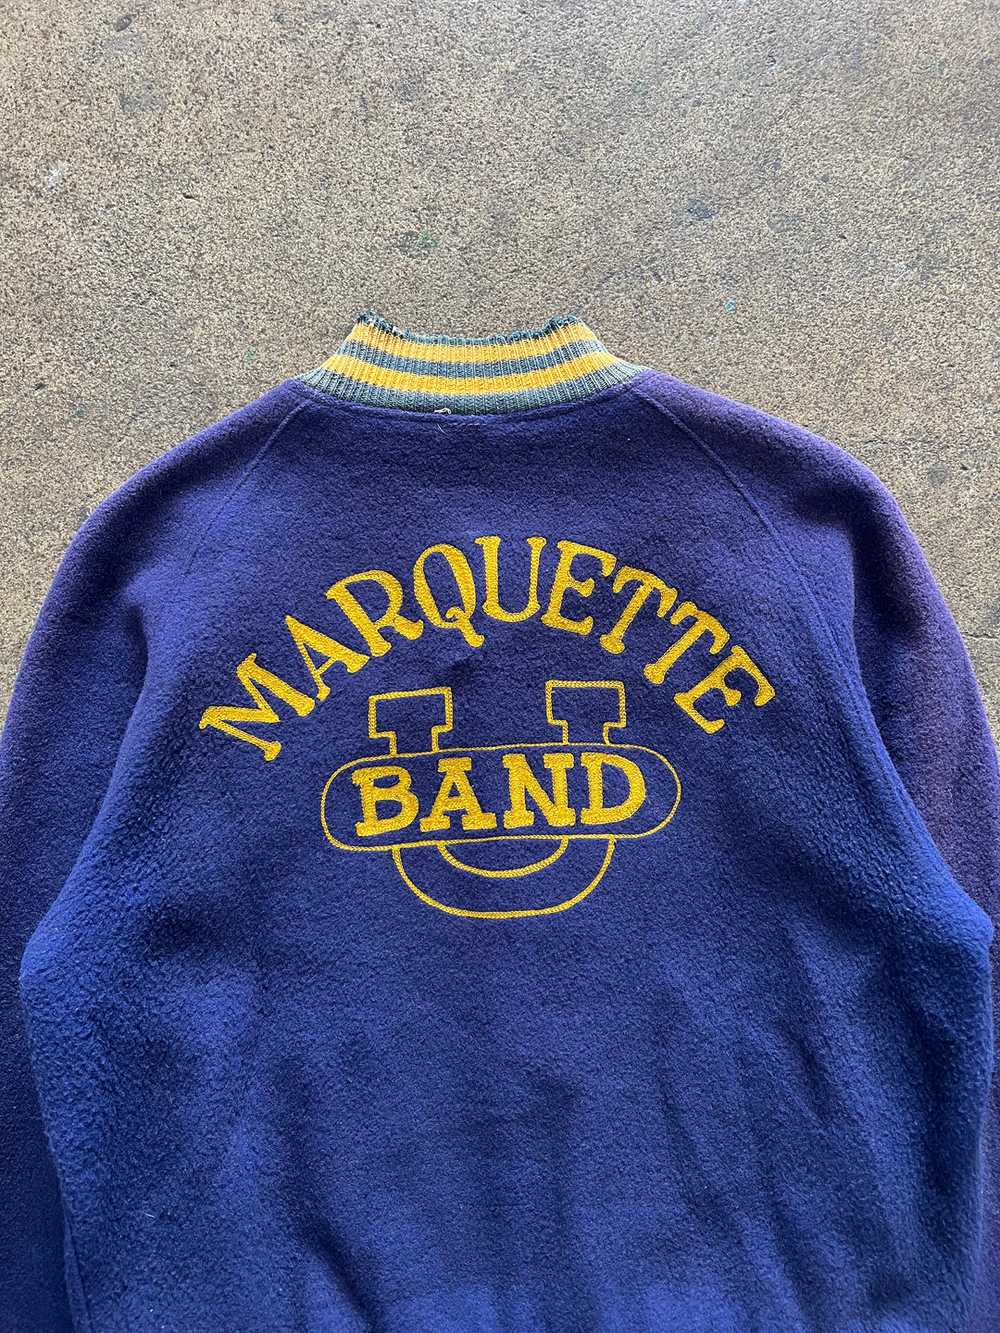 1950s Marquette Band Chain Stitch Varsity Jacket - image 4